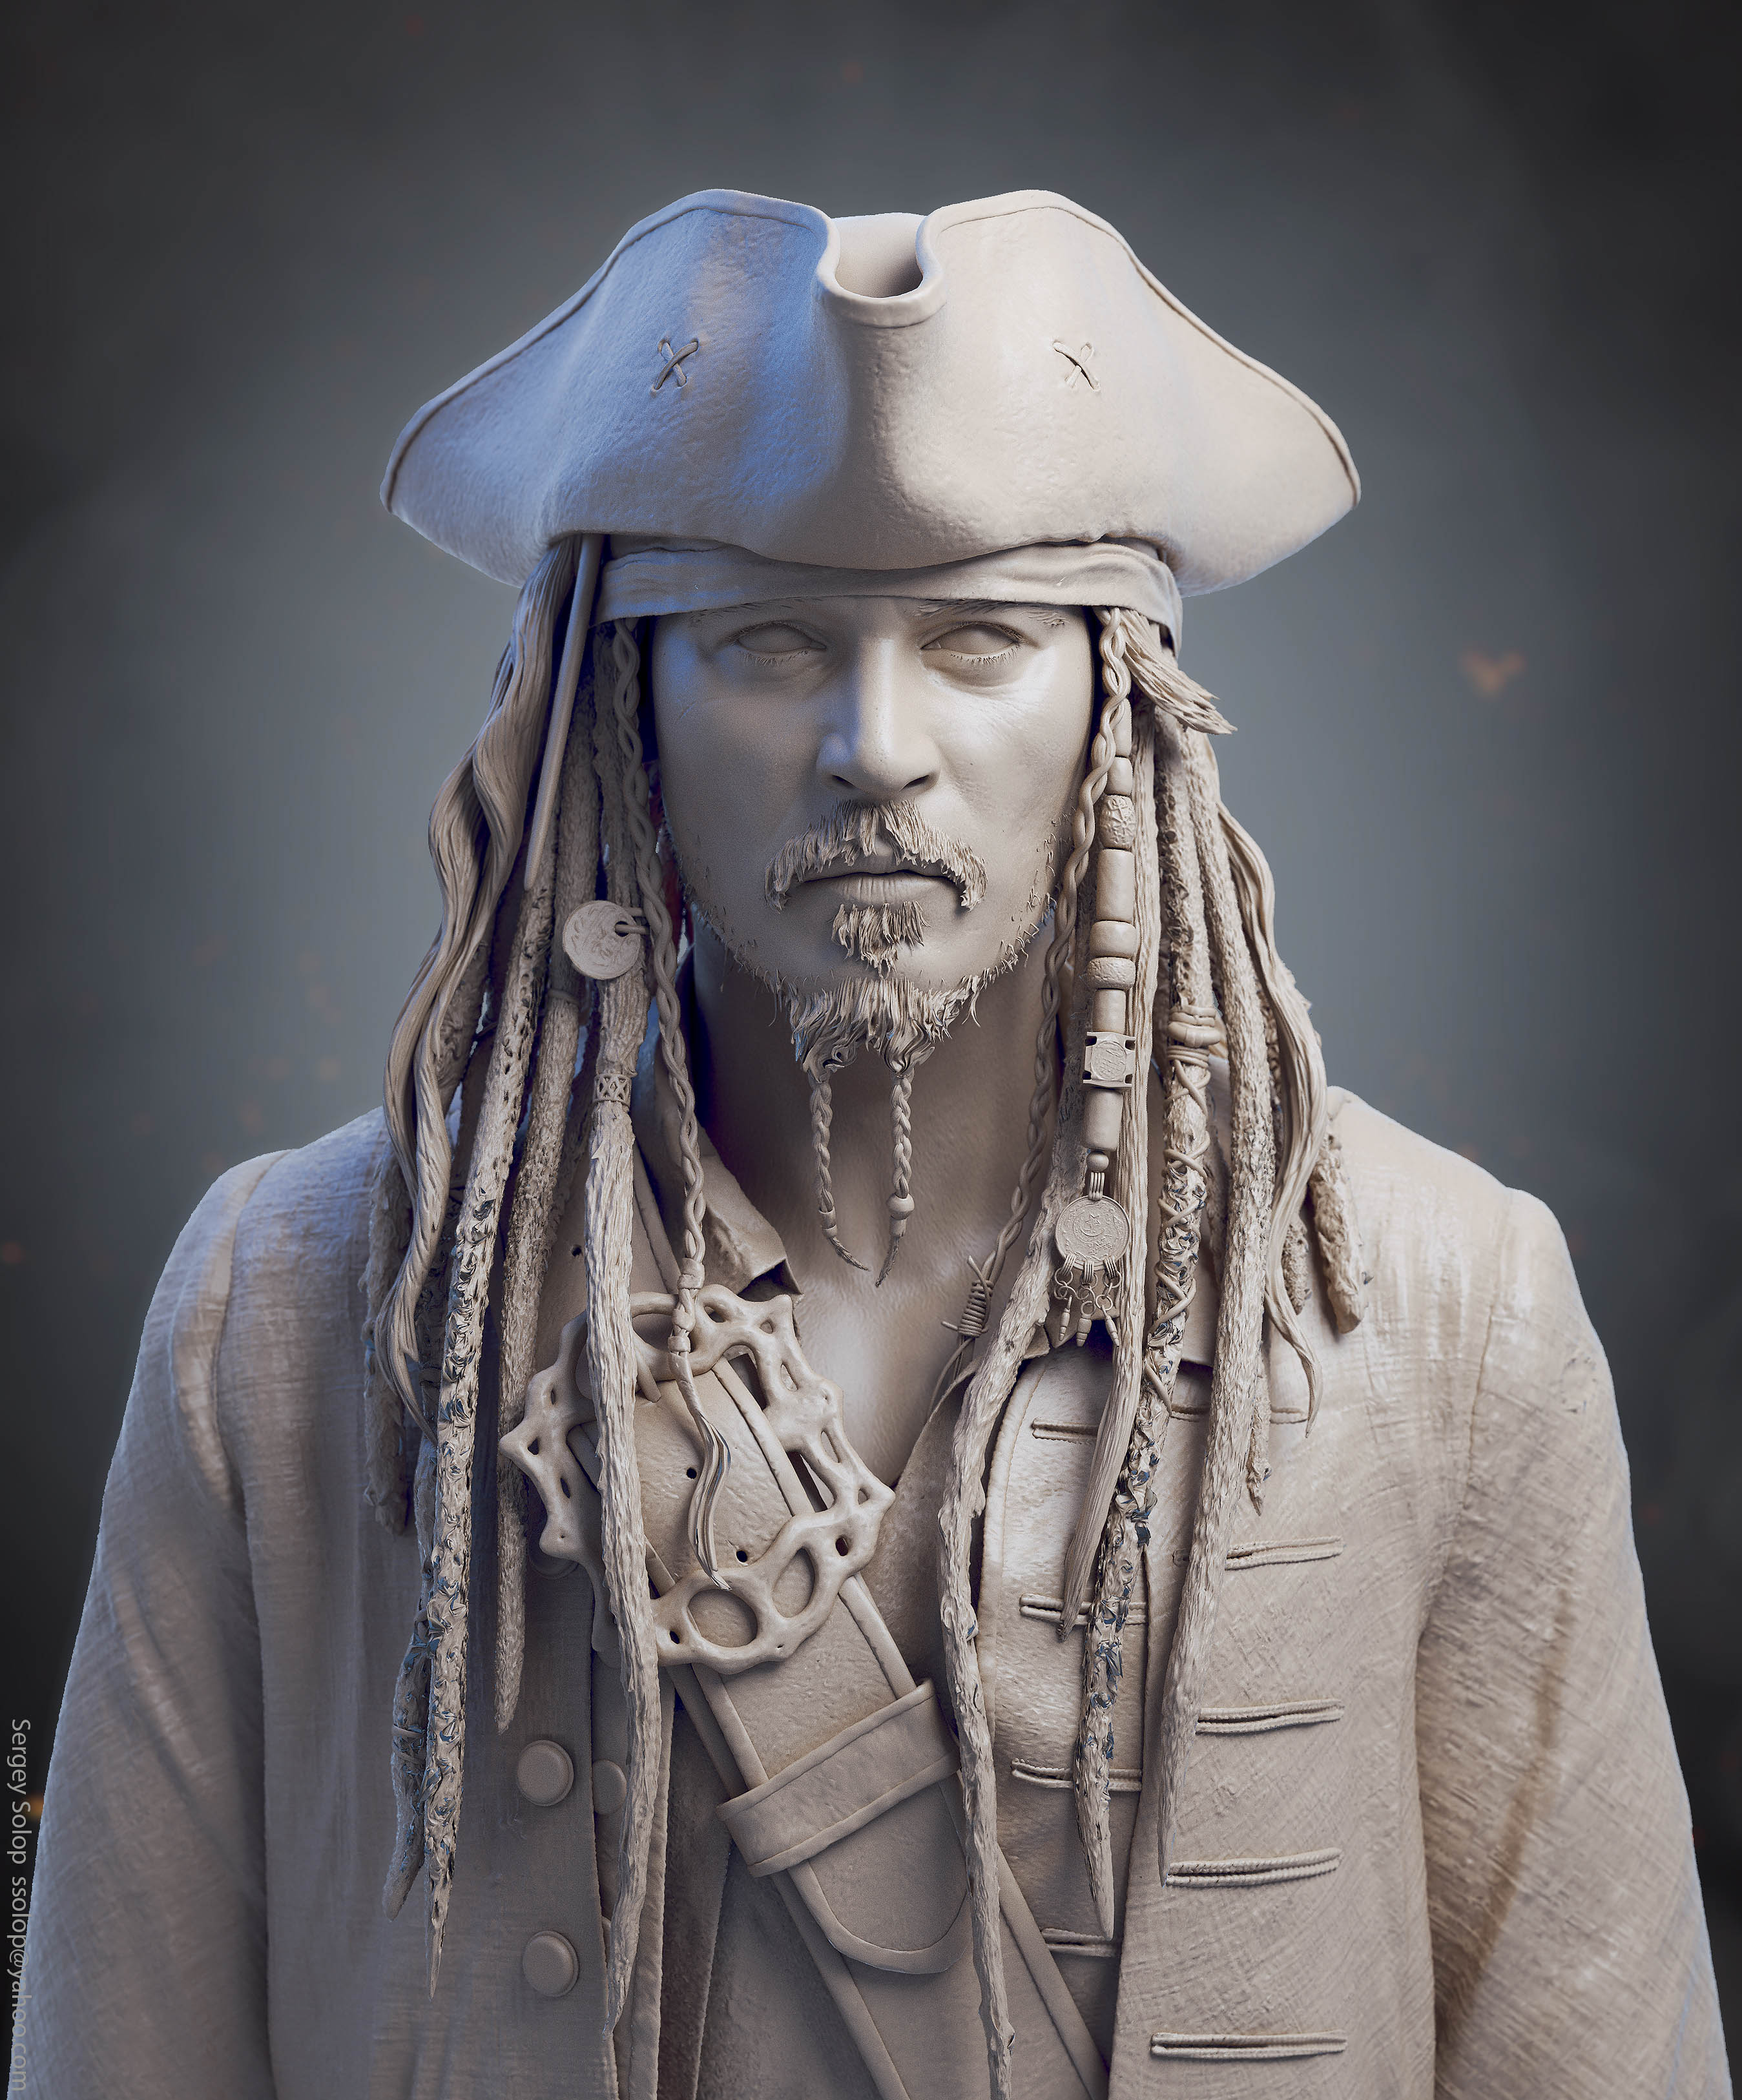 sergey-solop-jack-sparrow-pirates-of-the-caribbean-11.jpg